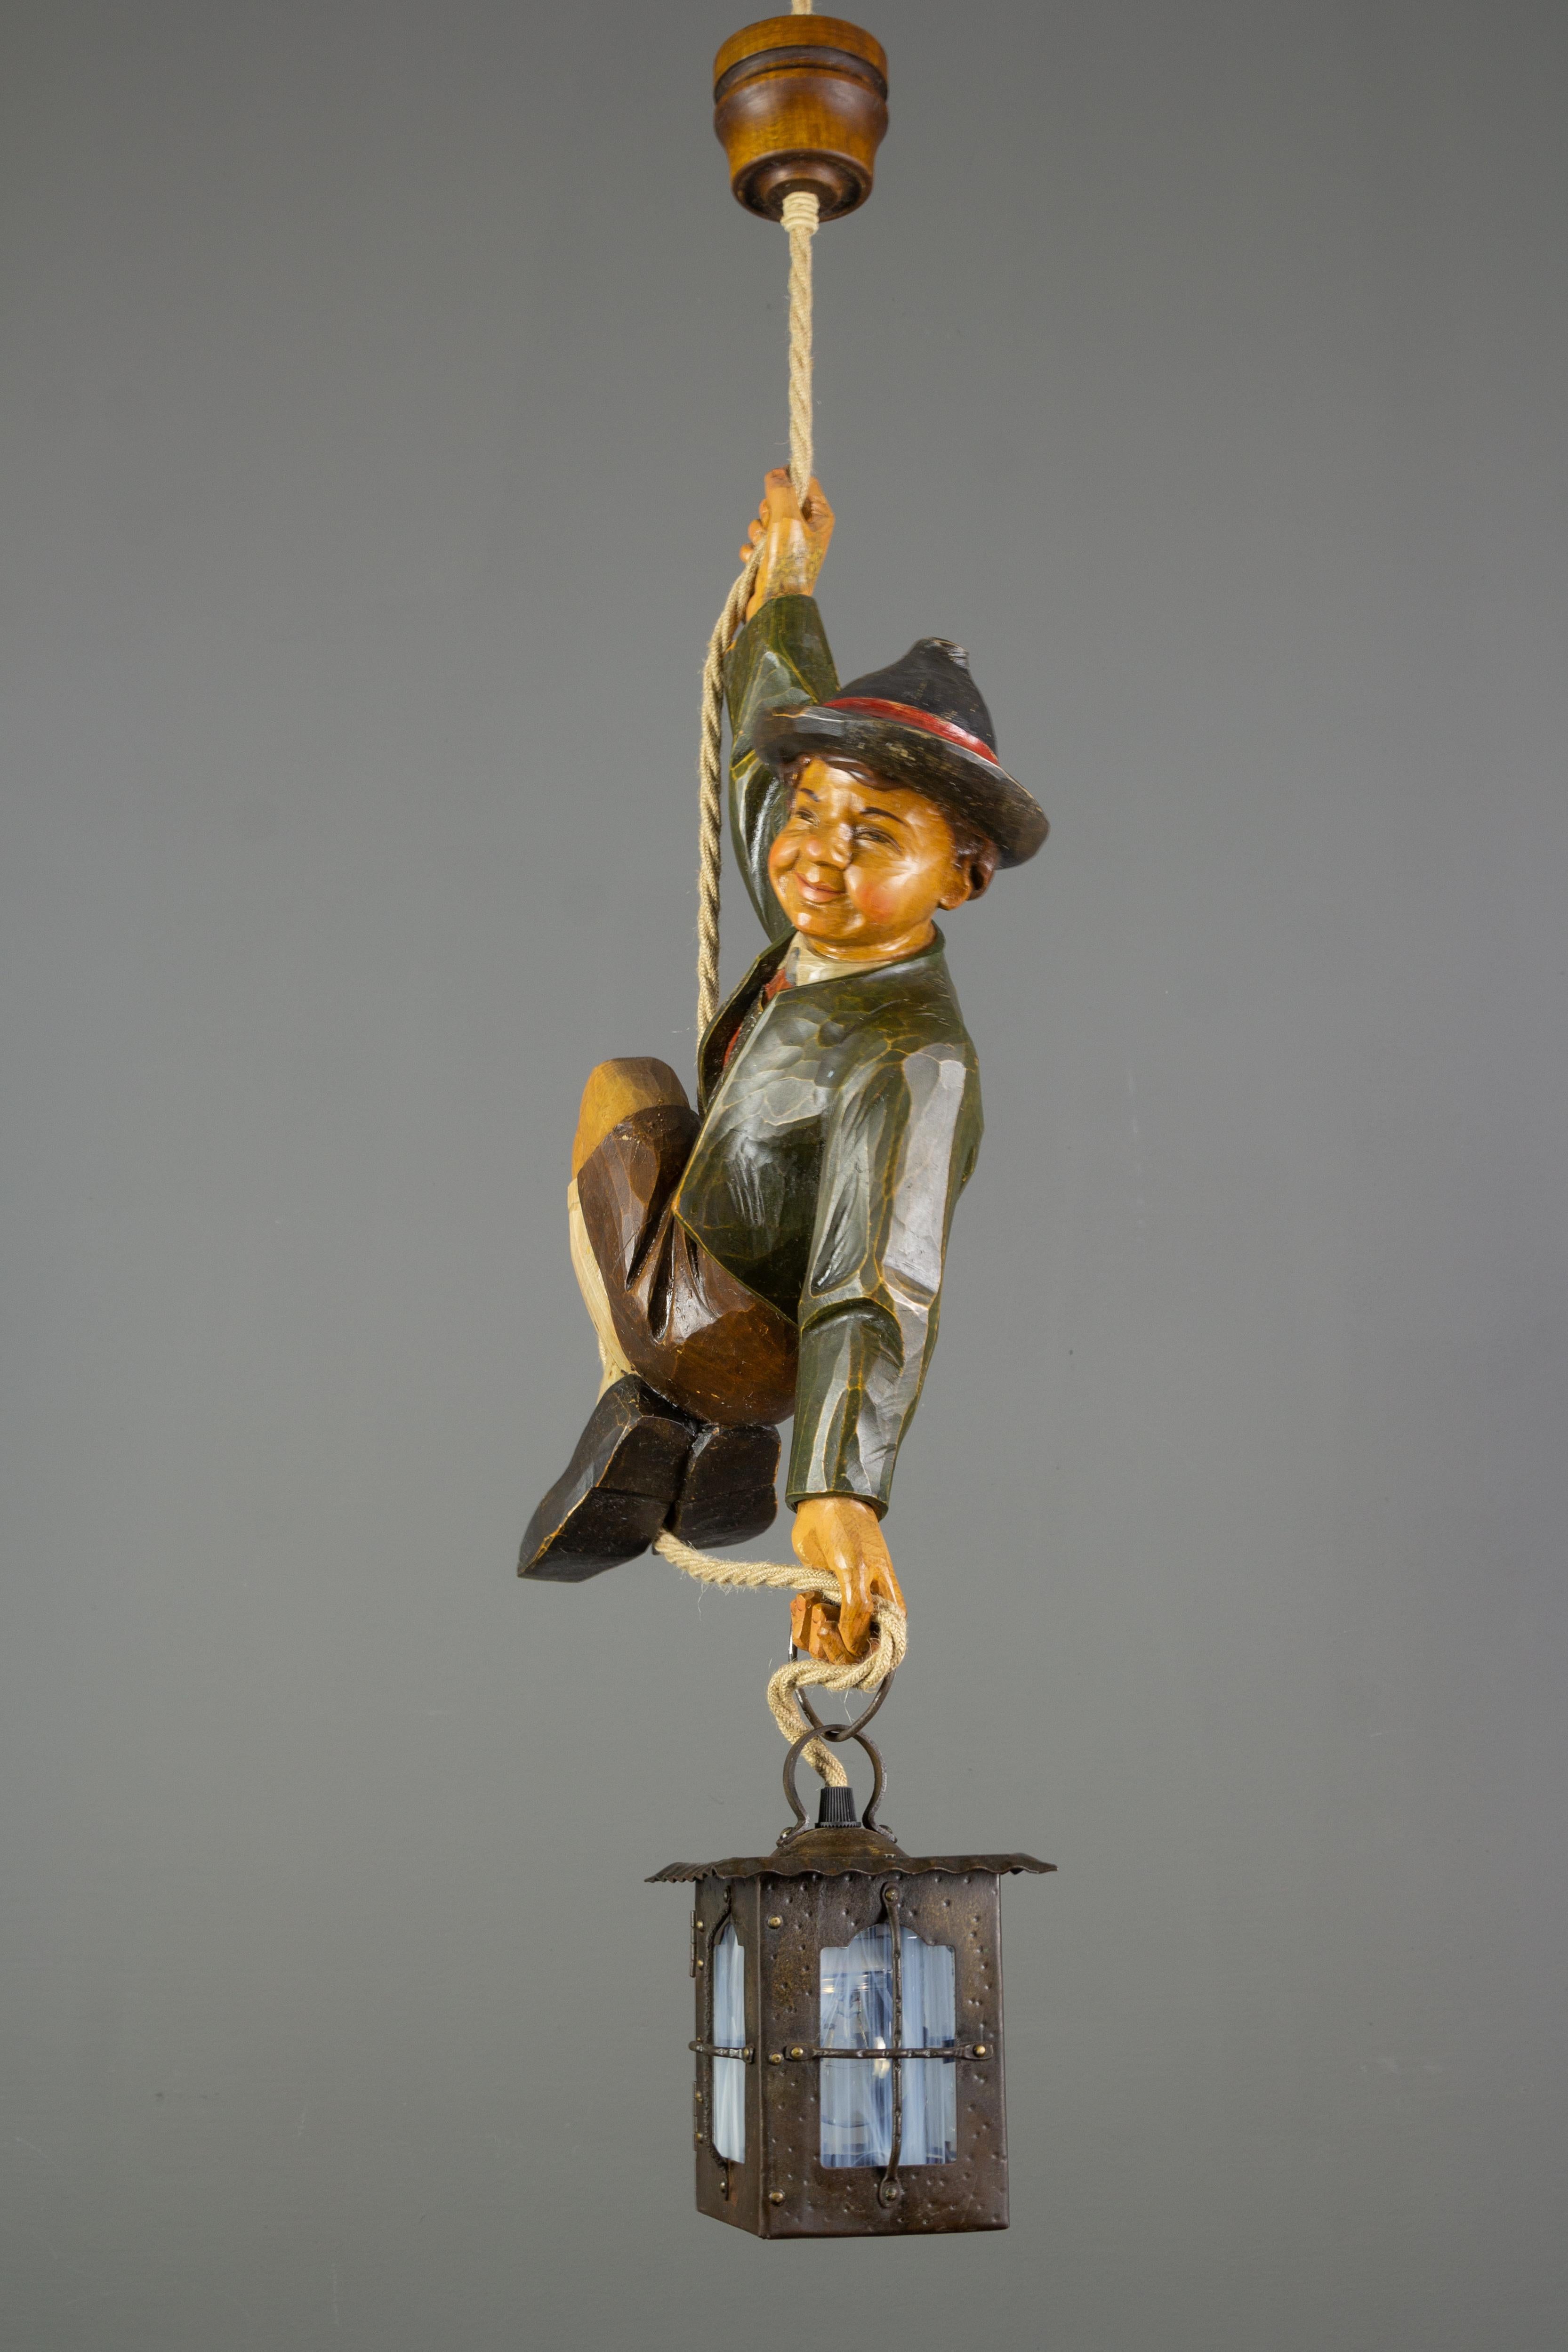 Mid-20th Century German Hanging Lamp with Hand Carved Sculpture of Mountain Climber and a Lantern